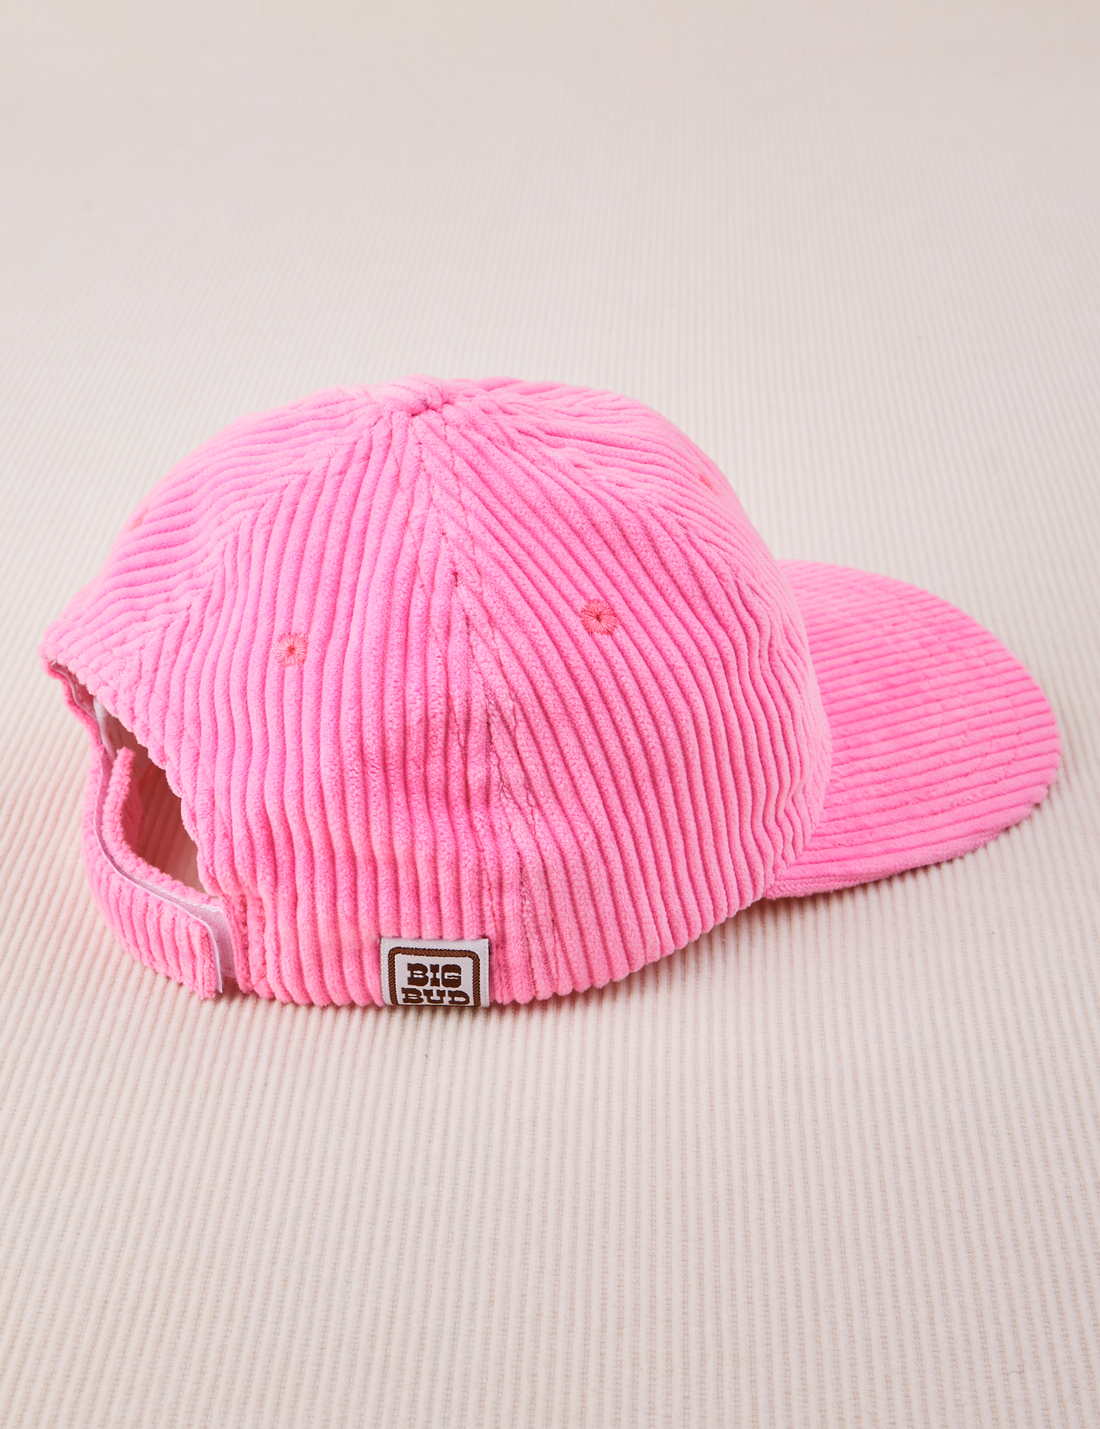 Side view of Dugout Corduroy Hat in Bubblegum Pink. Big Bud tag sewn on the side.